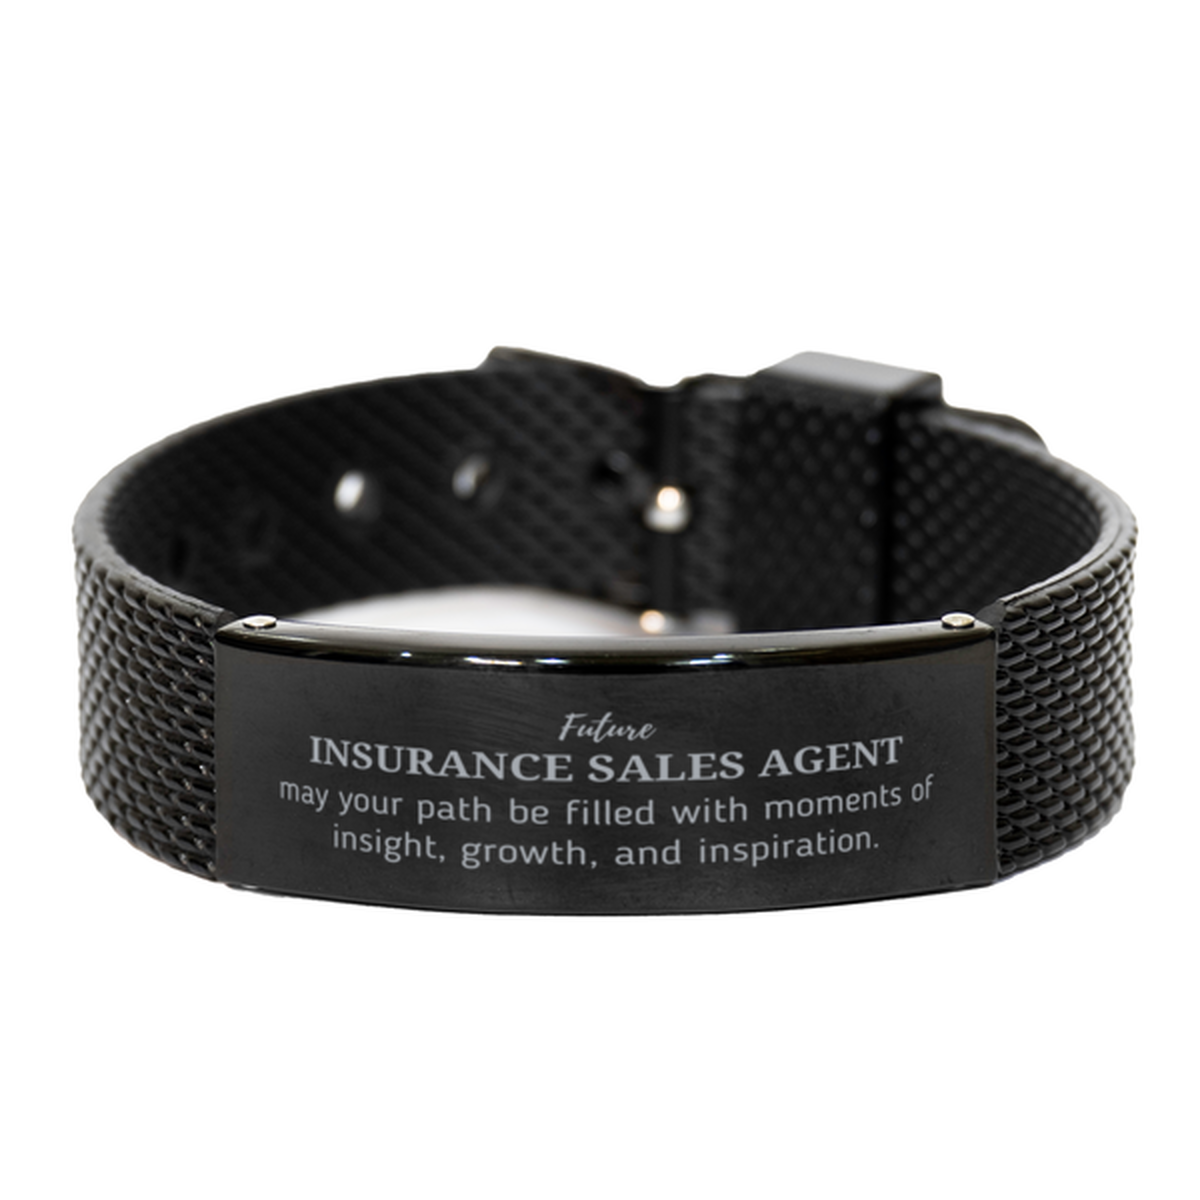 Future Insurance Sales Agent Gifts, May your path be filled with moments of insight, Graduation Gifts for New Insurance Sales Agent, Christmas Unique Black Shark Mesh Bracelet For Men, Women, Friends